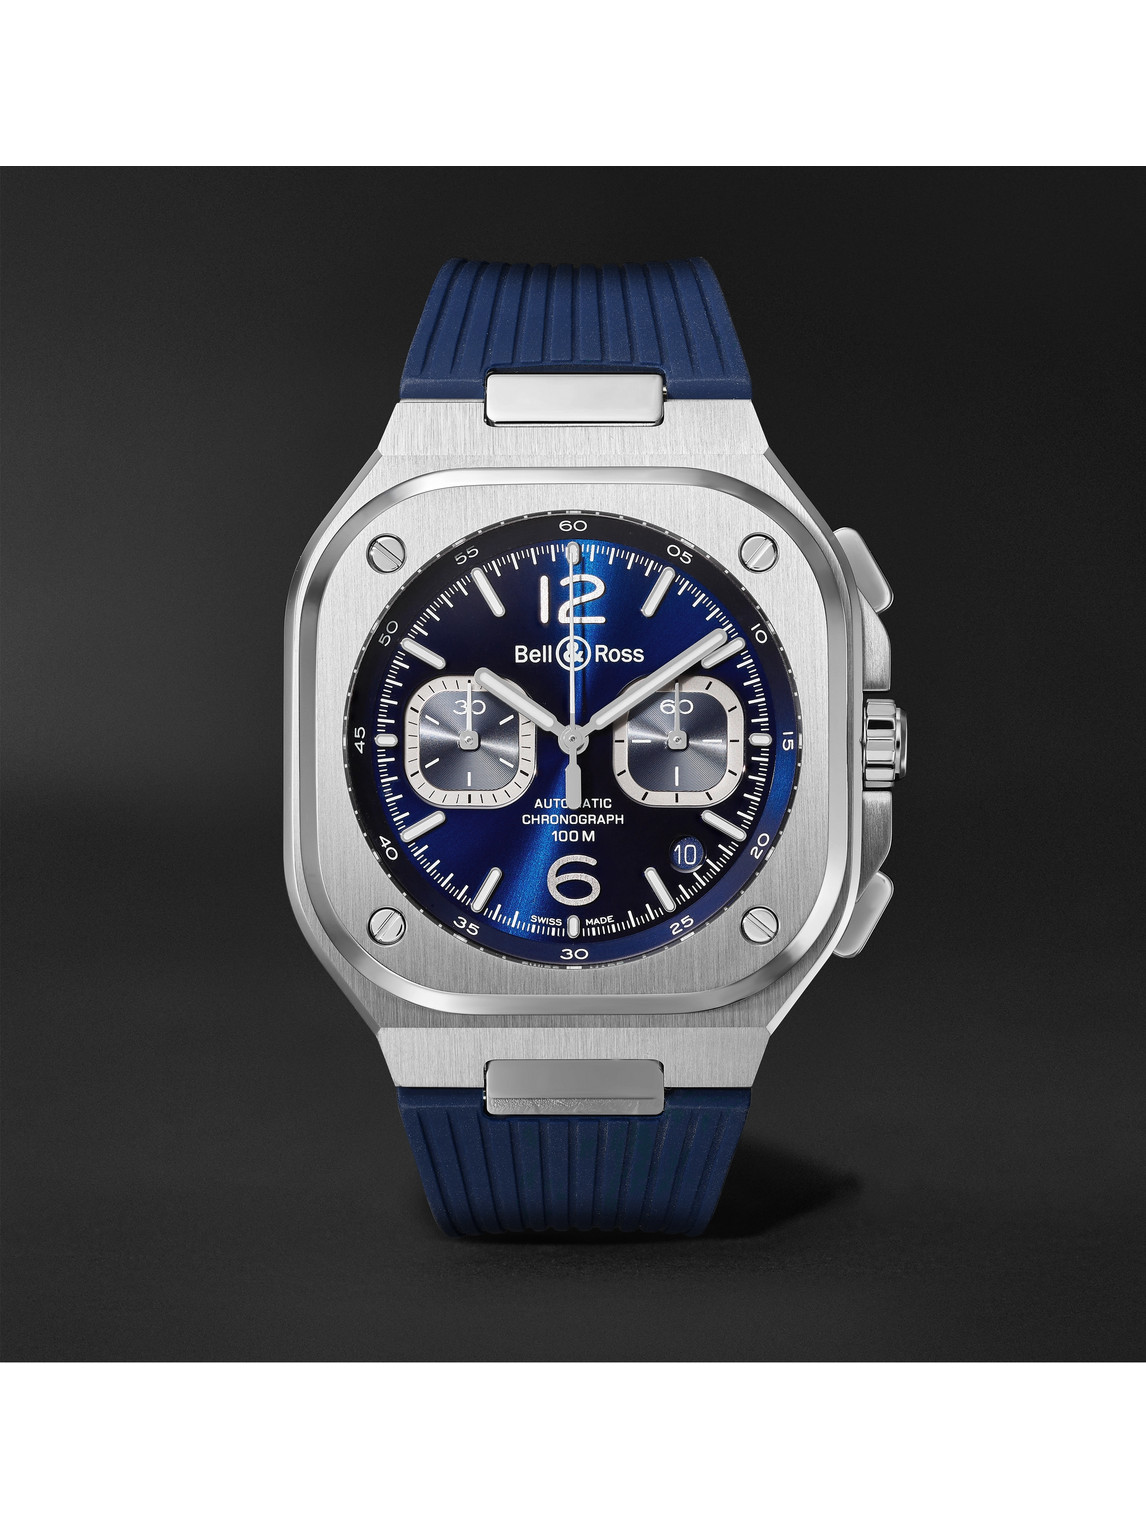 BR 05 Automatic Chronograph 40mm Stainless Steel and Rubber Watch, Ref.No. BR05C-BUBU-ST/SRB